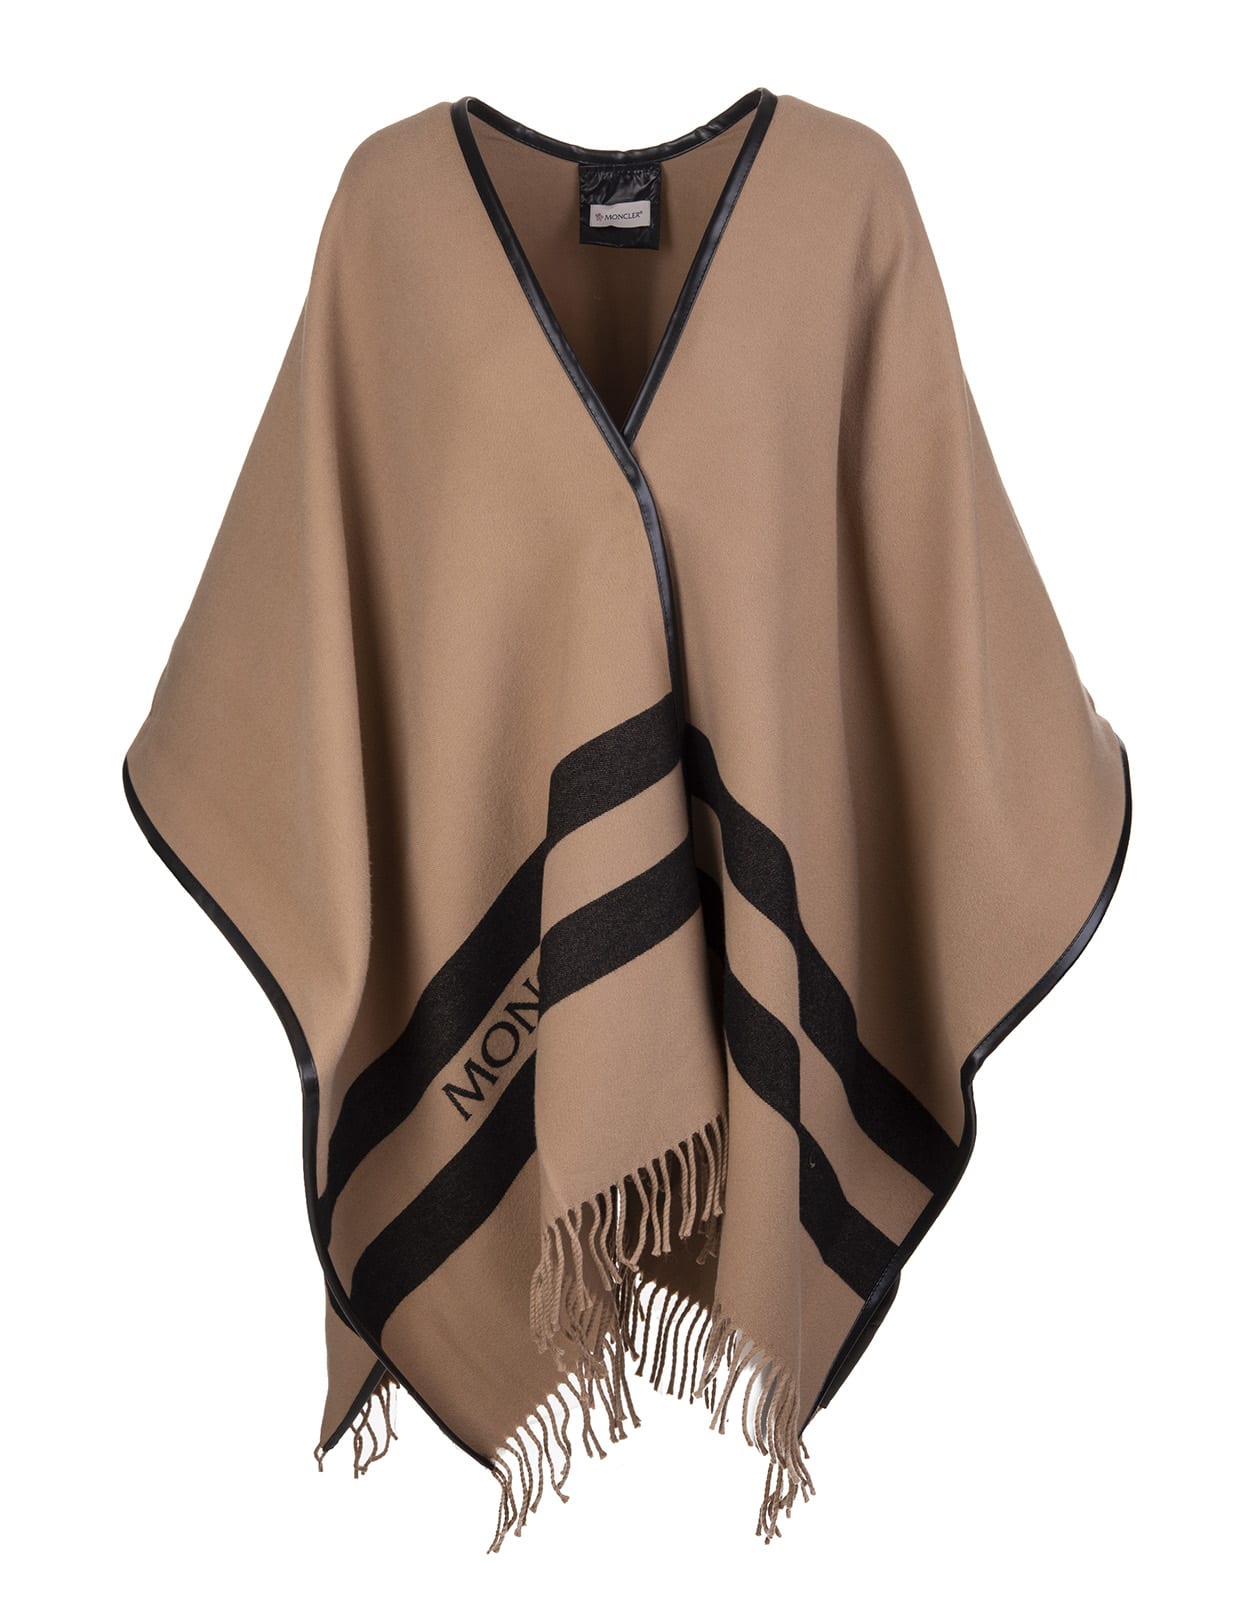 Moncler Woman Beige And Black Jacquard Wool Poncho